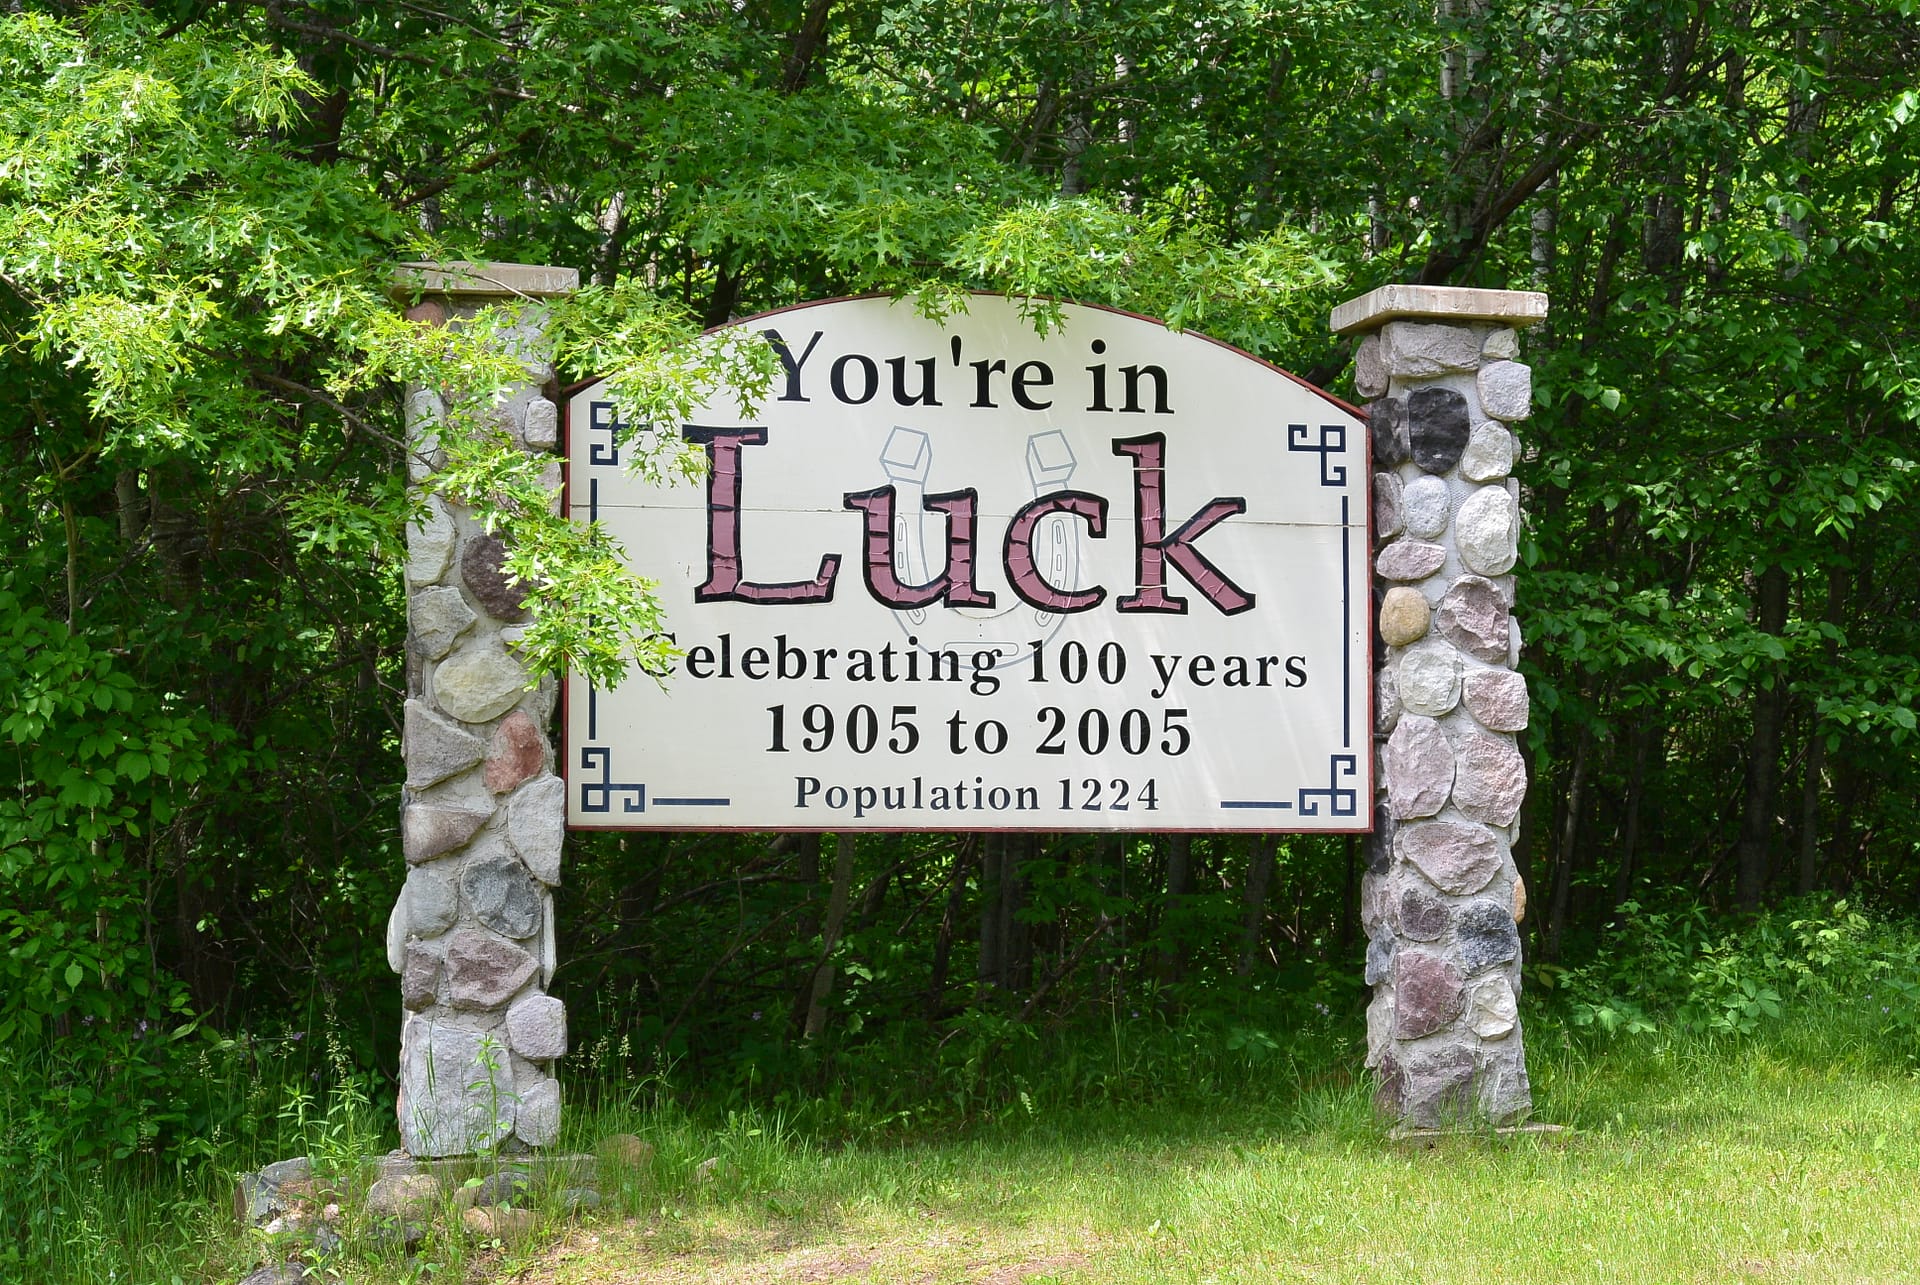 The welcome sign to Luck, WI.